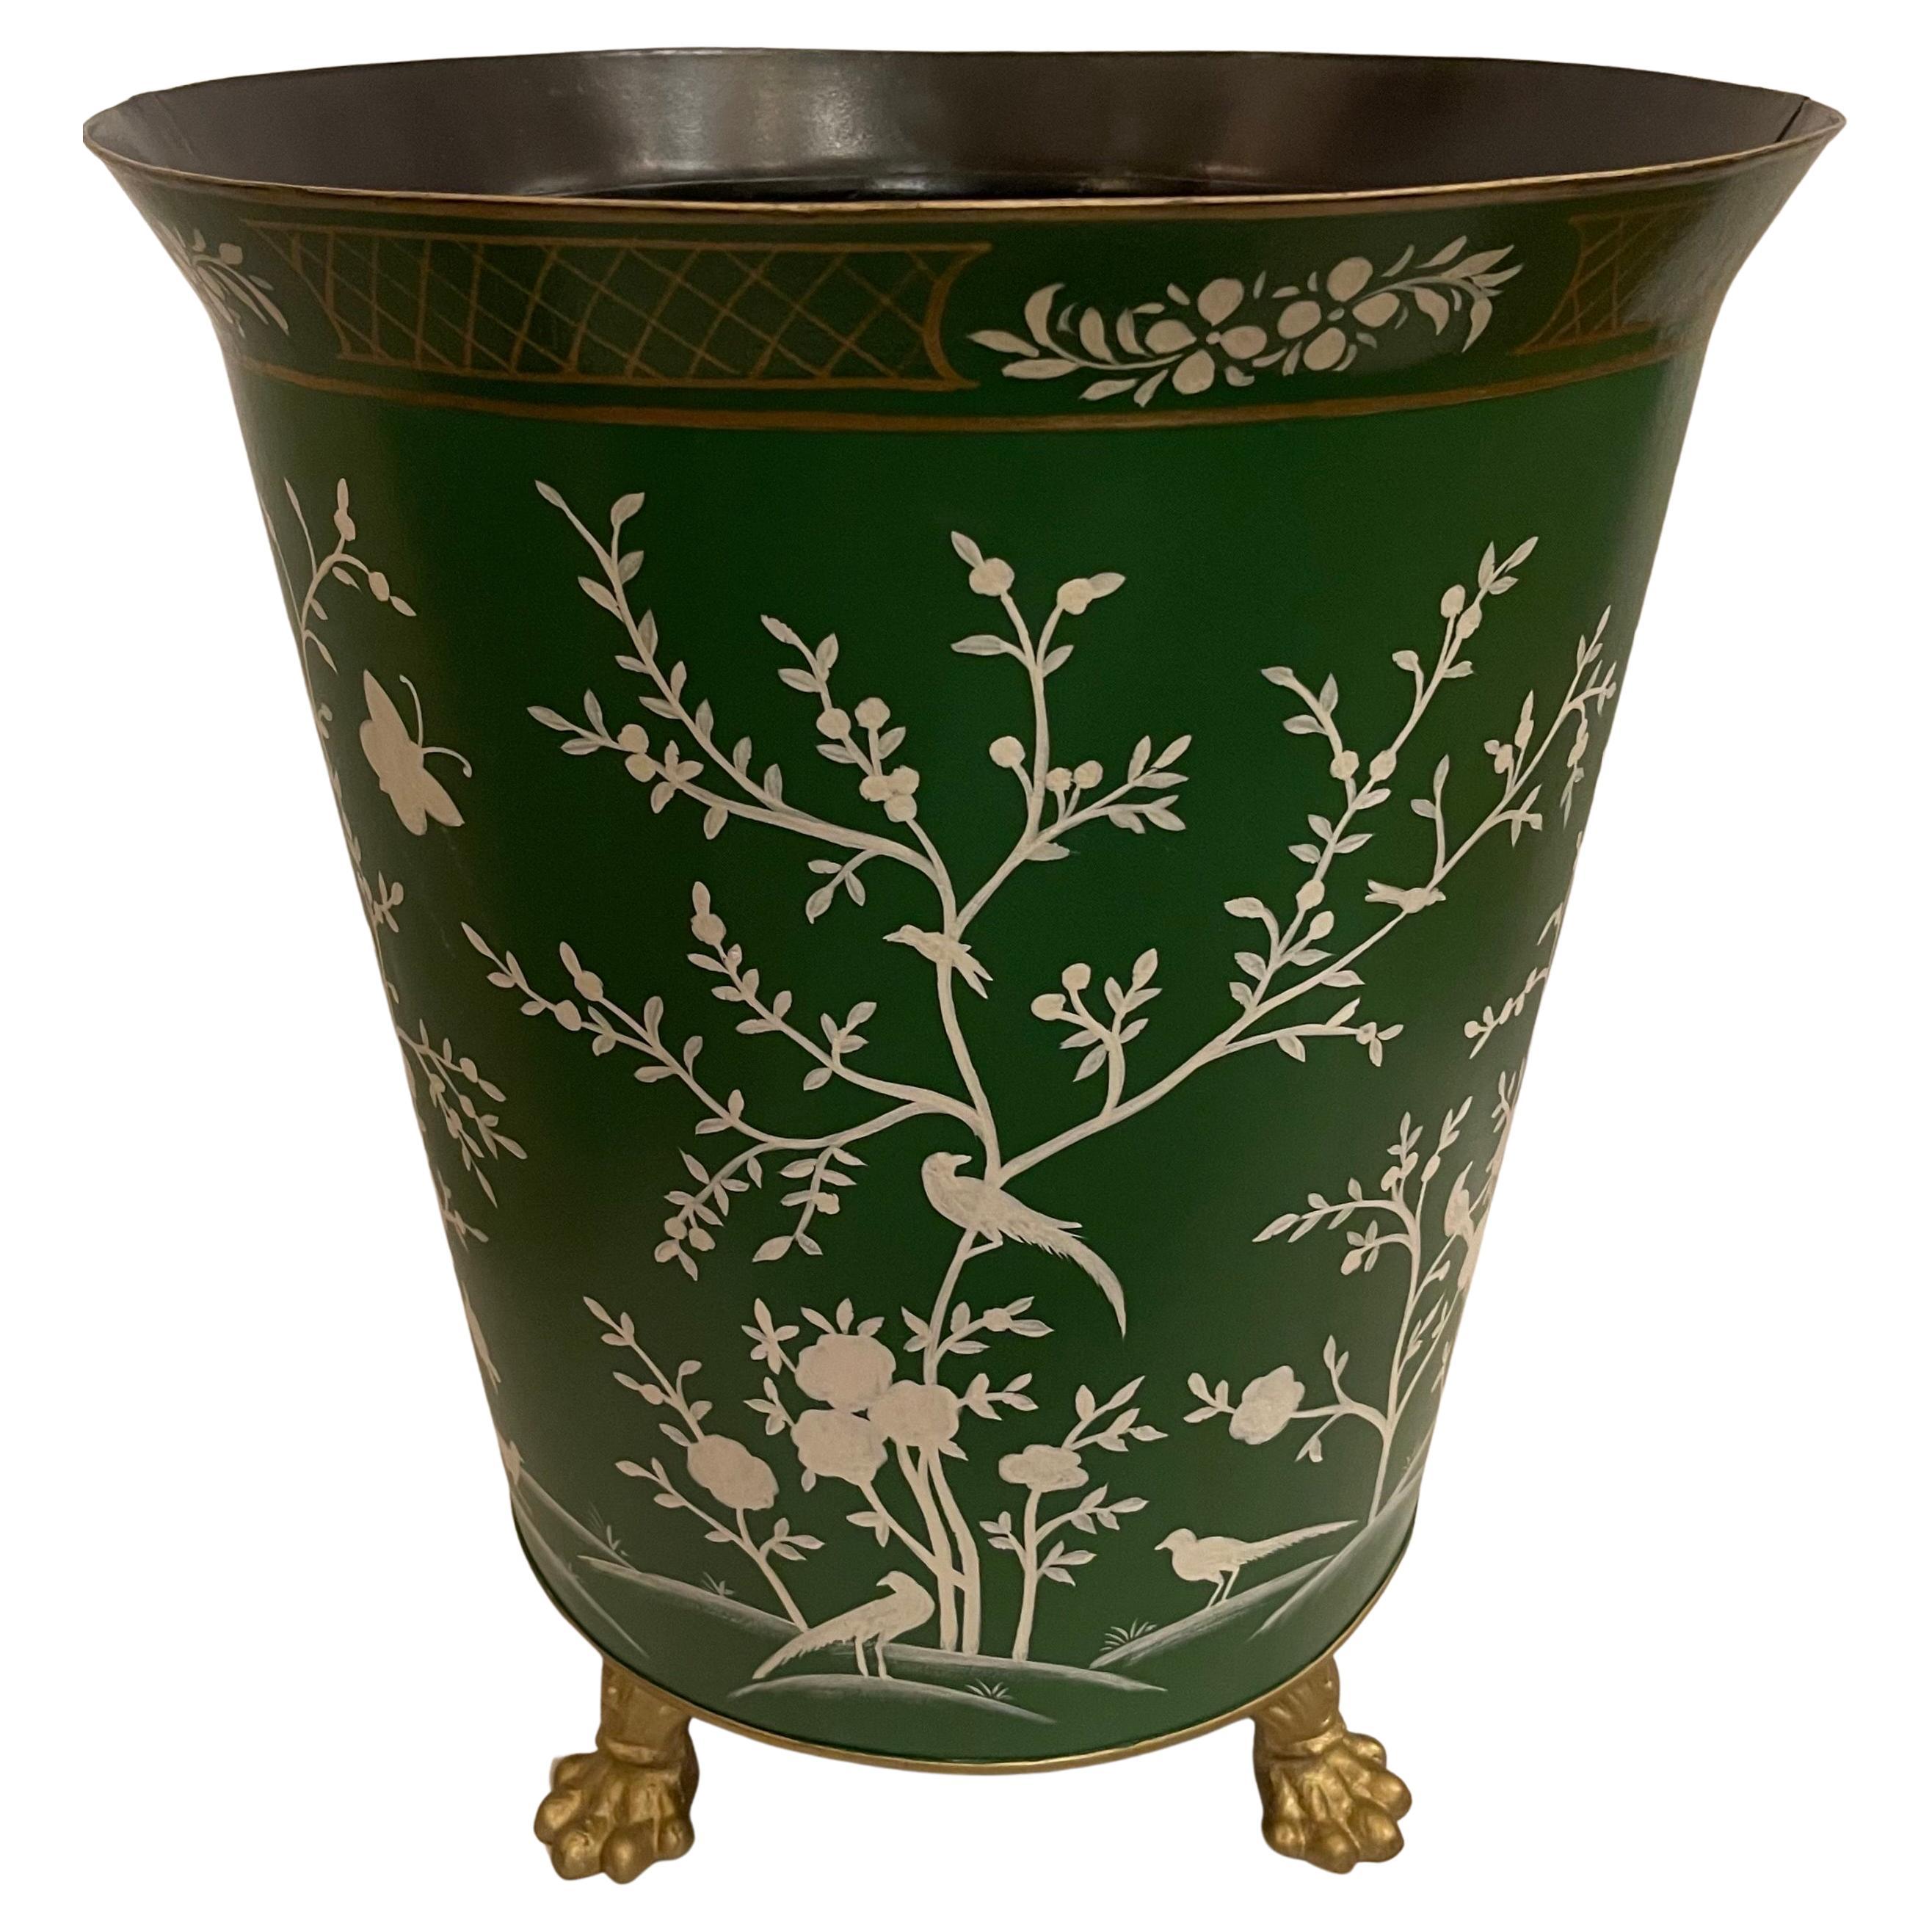 A Wonderful Tole Hand Painted Chinoiserie Moss Green And White Large Planter Raised On Gold Gilt Paw Feet.